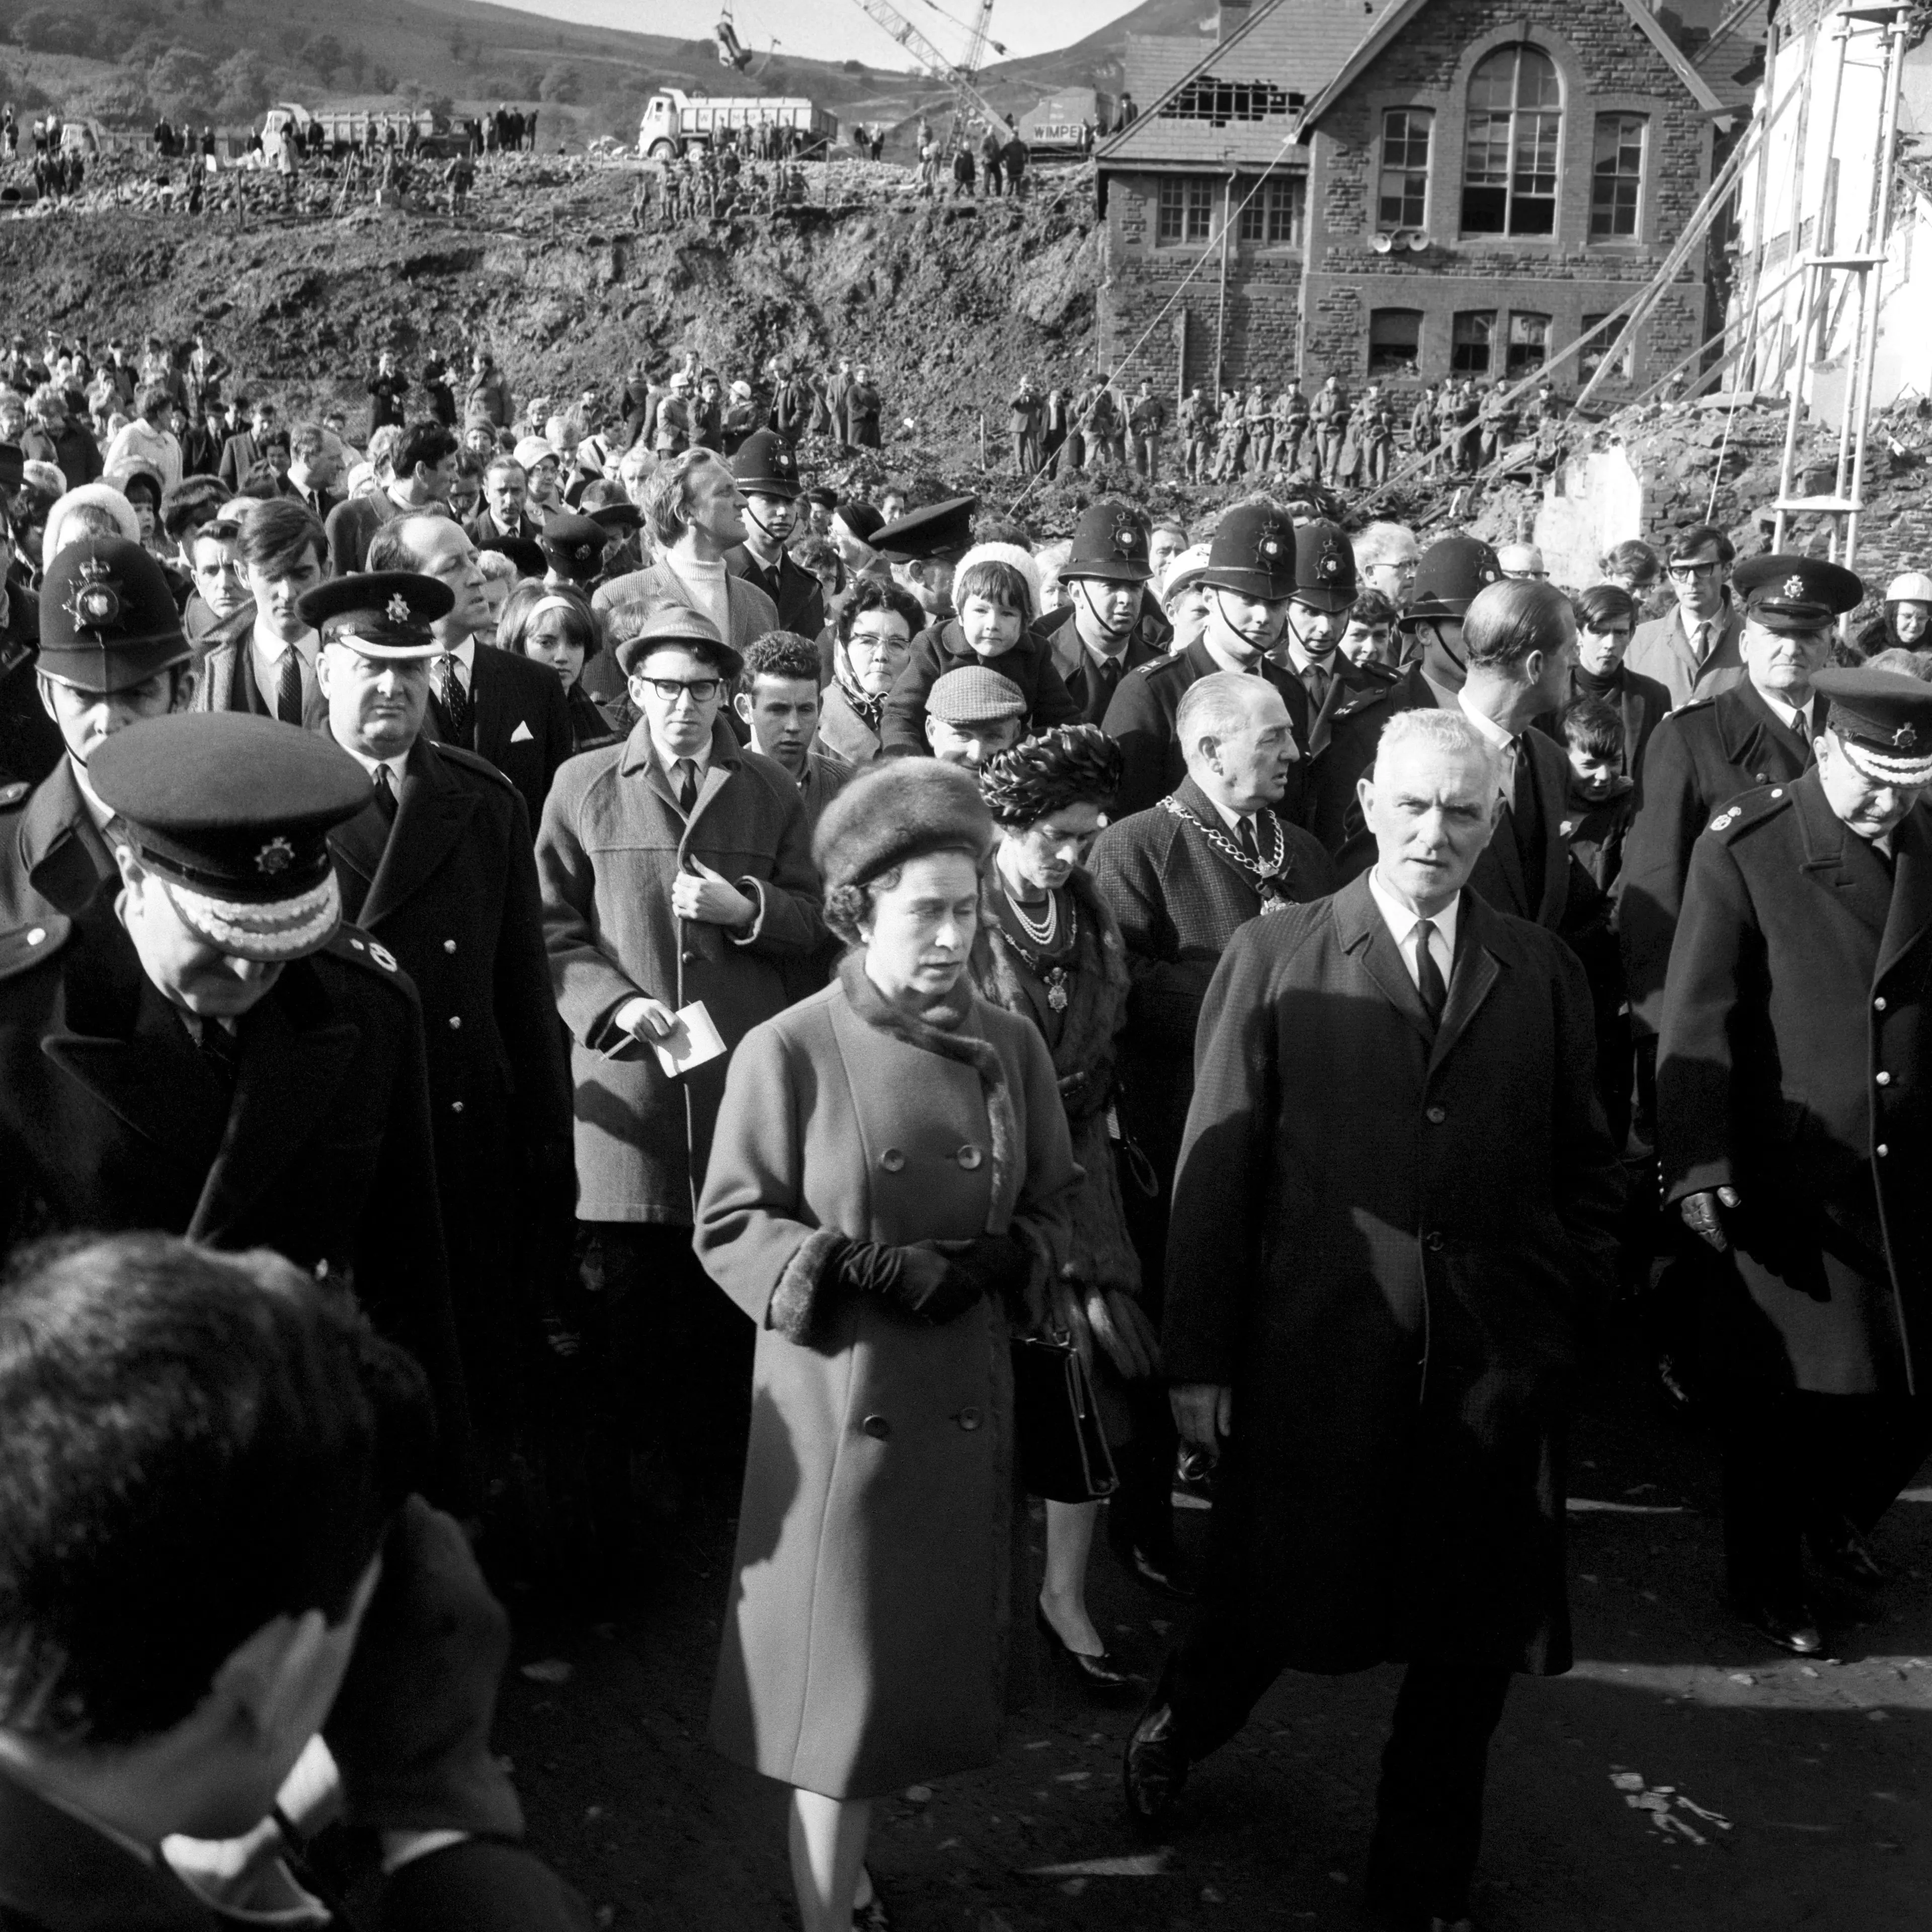 The Queen visiting the site of the Aberfan disaster in 1966. (